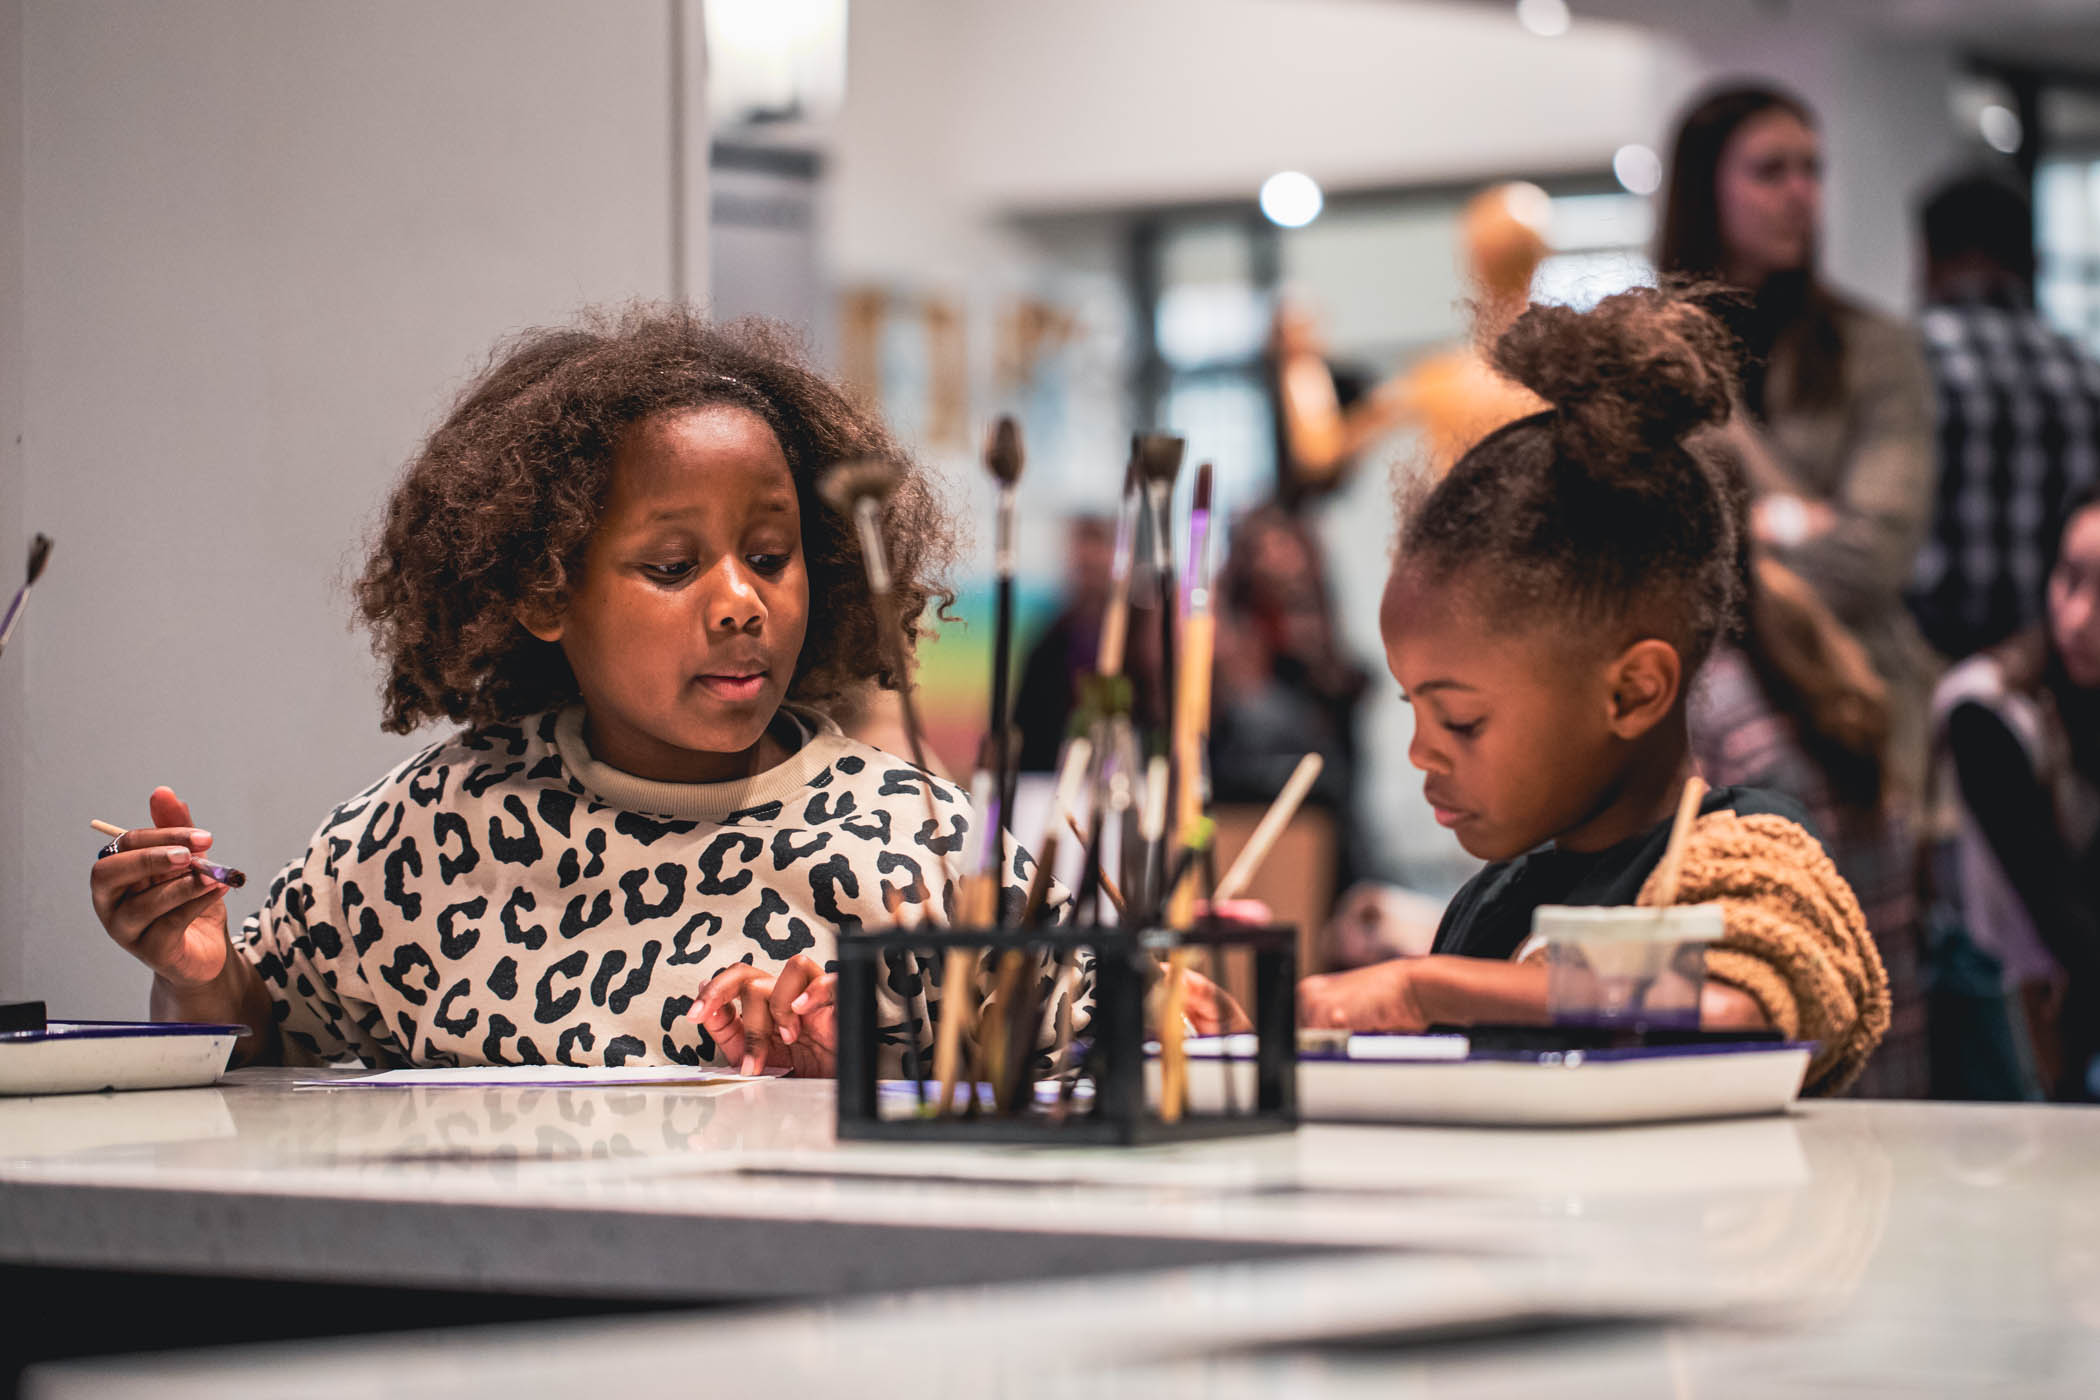 Two young girls sitting at a table with a rack of paint brushes in the center working on an art project